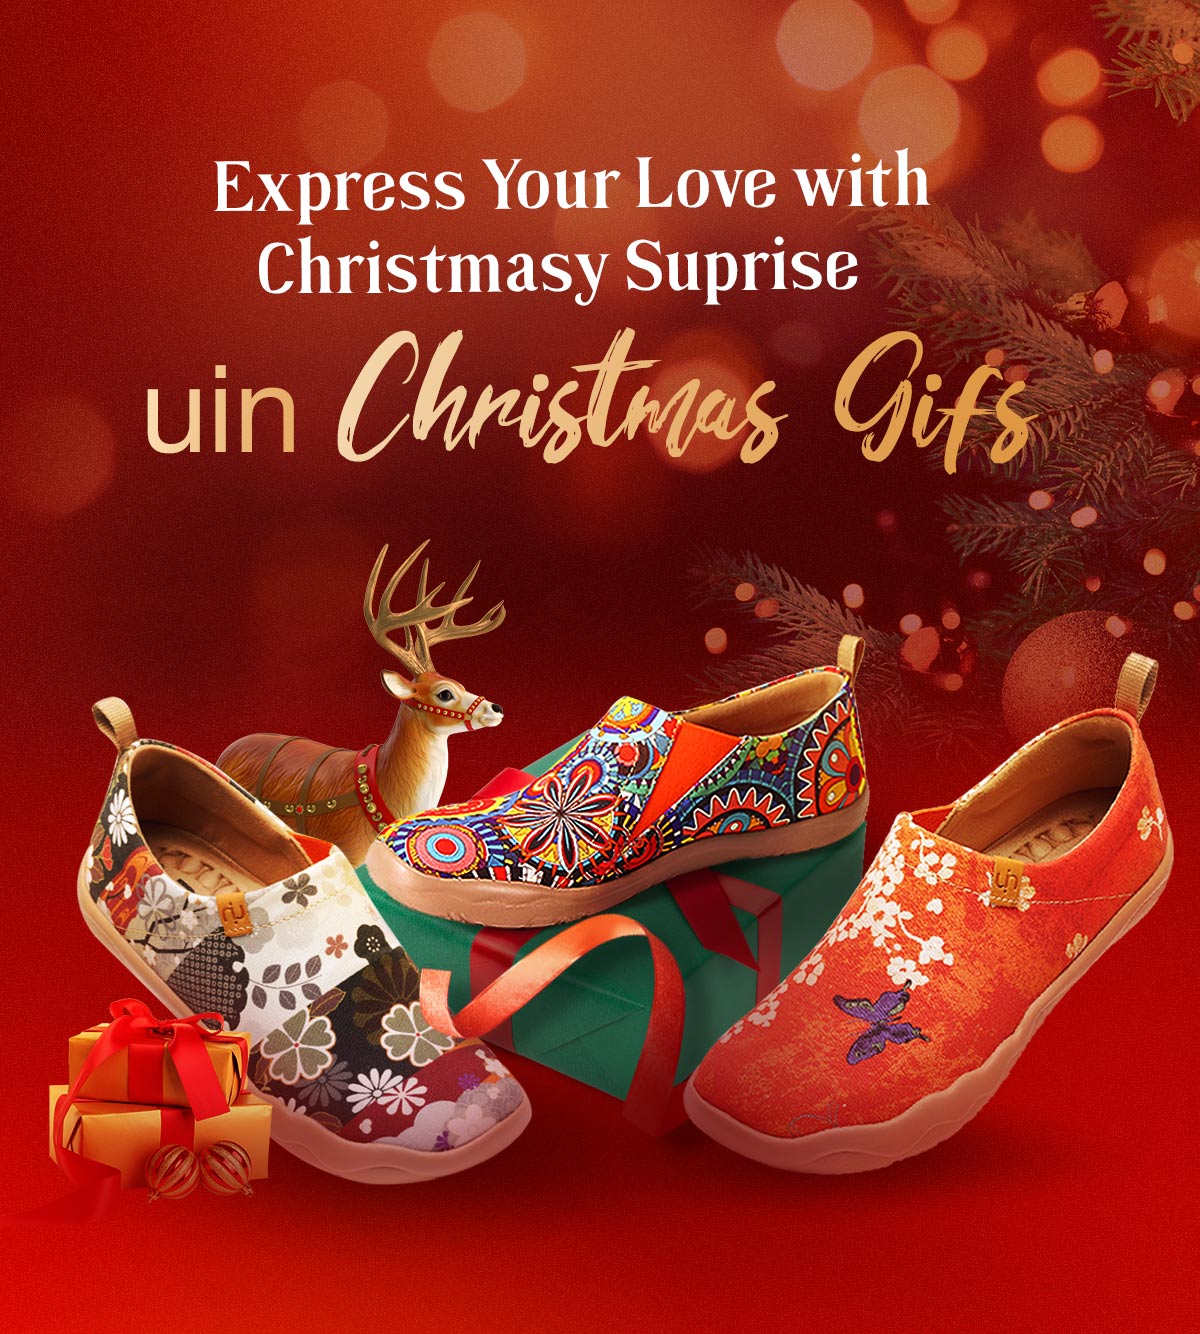  Express Your Love wi Christmasy Suprise 1g f%m Qofs 